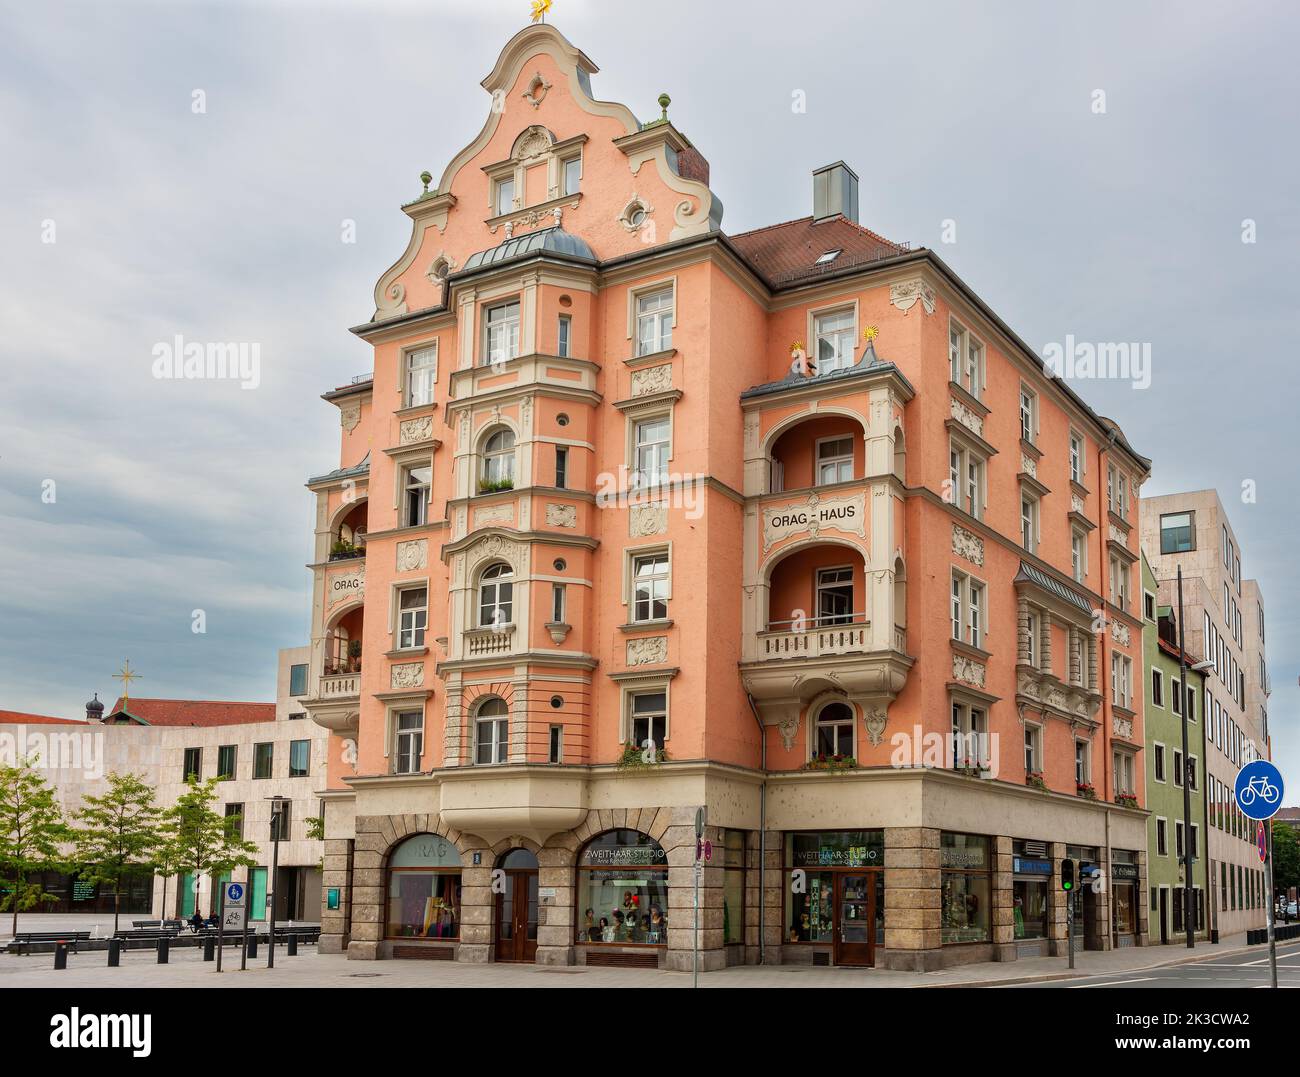 Munich, Germany - July 4, 2011 : ORAG-Haus, historic house in Munich Old Town. Repaired after World War Two, now a monument of Bavaria. Stock Photo